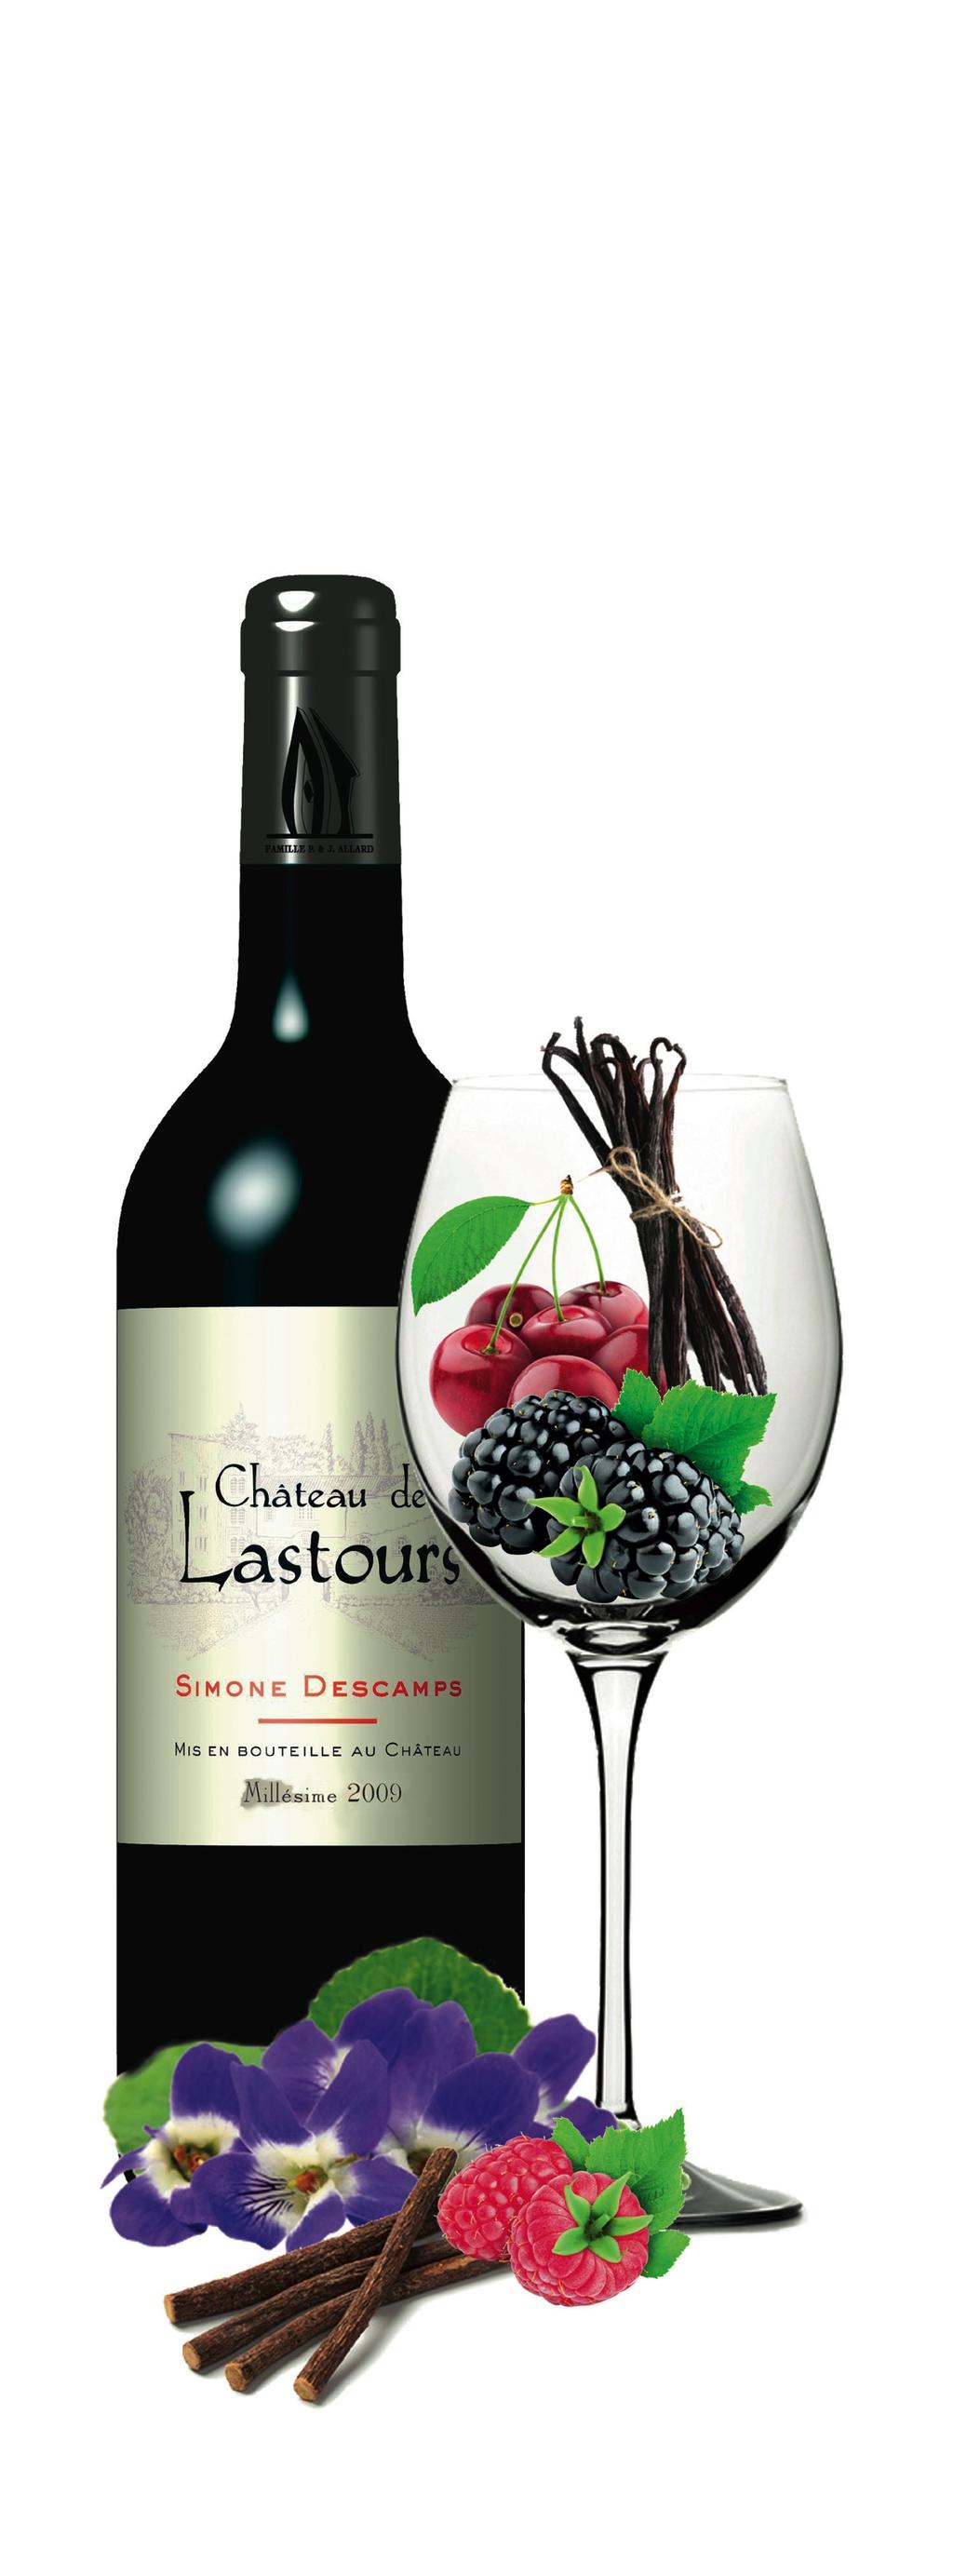 TELL ME MORE ABOUT AROMAS / 3 Good reasons to taste and/or offer a Château de Lastours wine. This wine is unique, like his terroir.